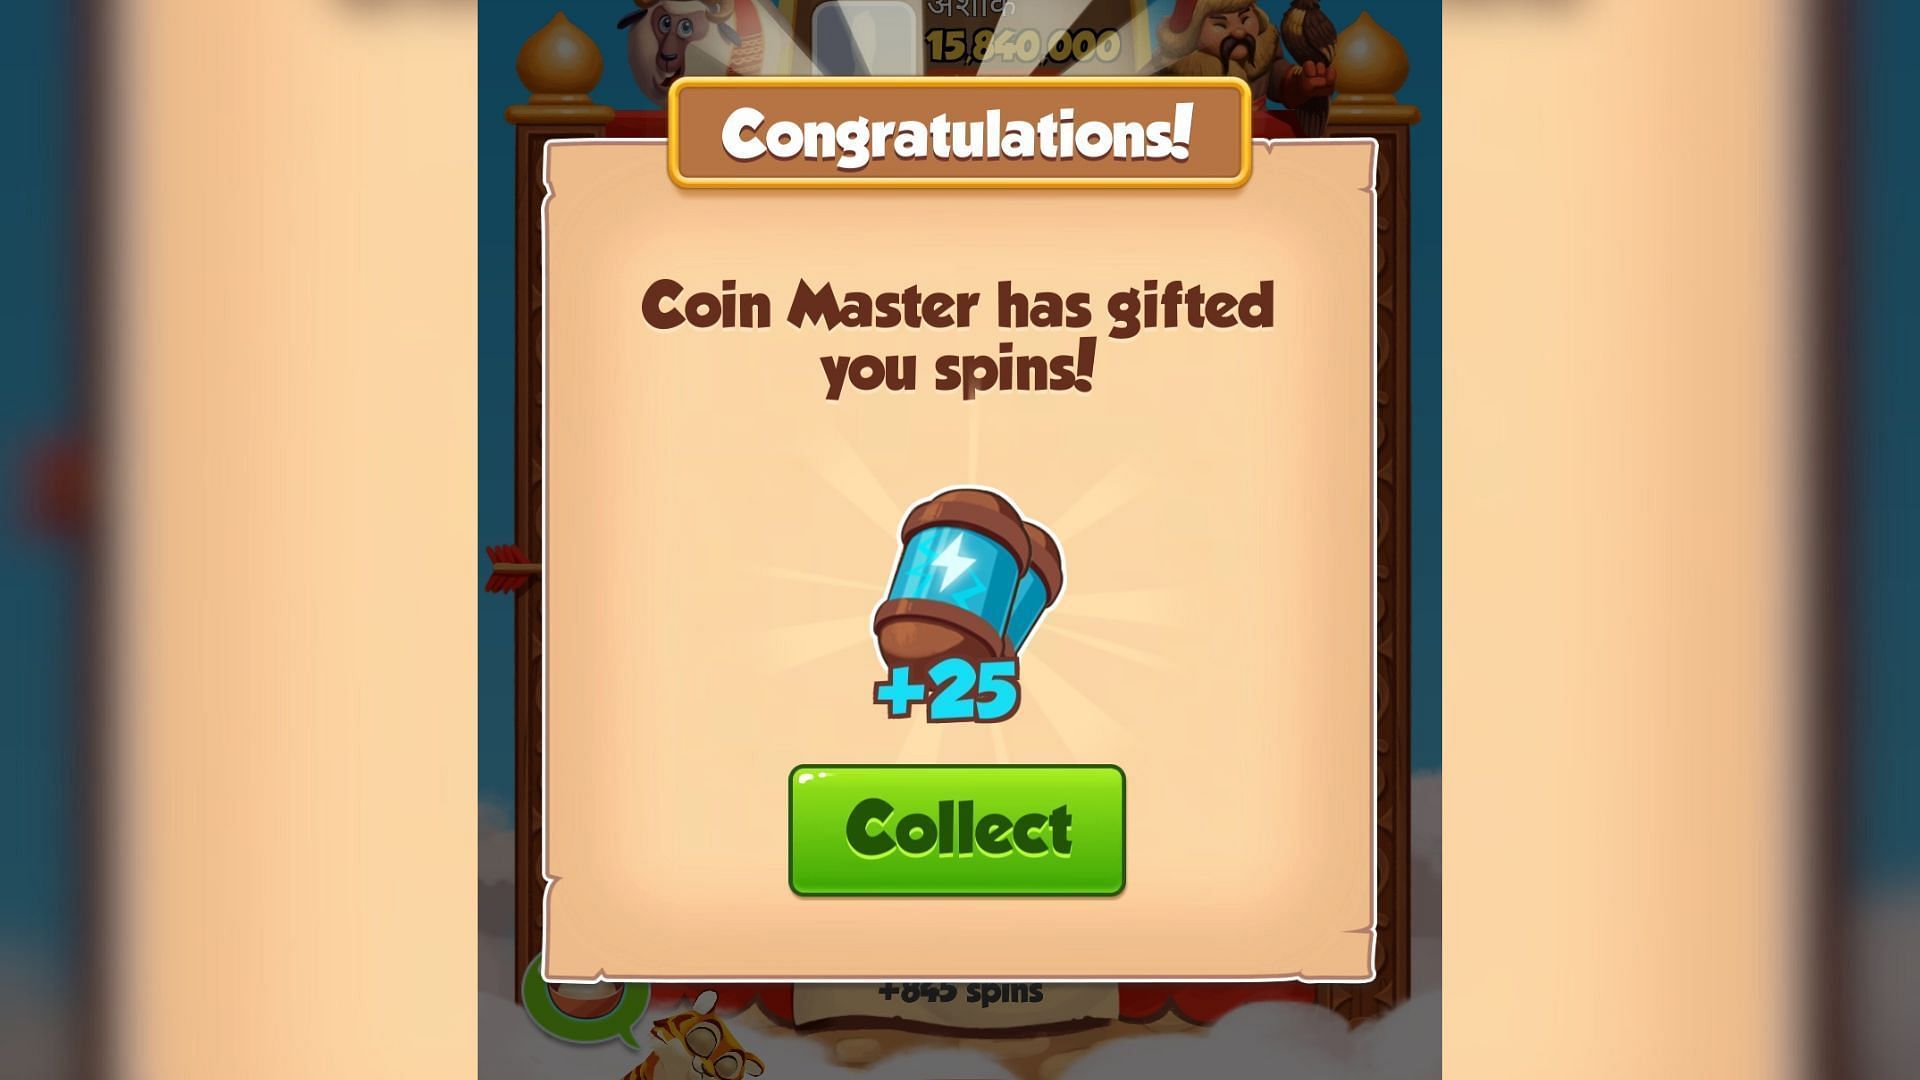 Hit the green Collect button to claim free spins and coins (Image via Moon Active)